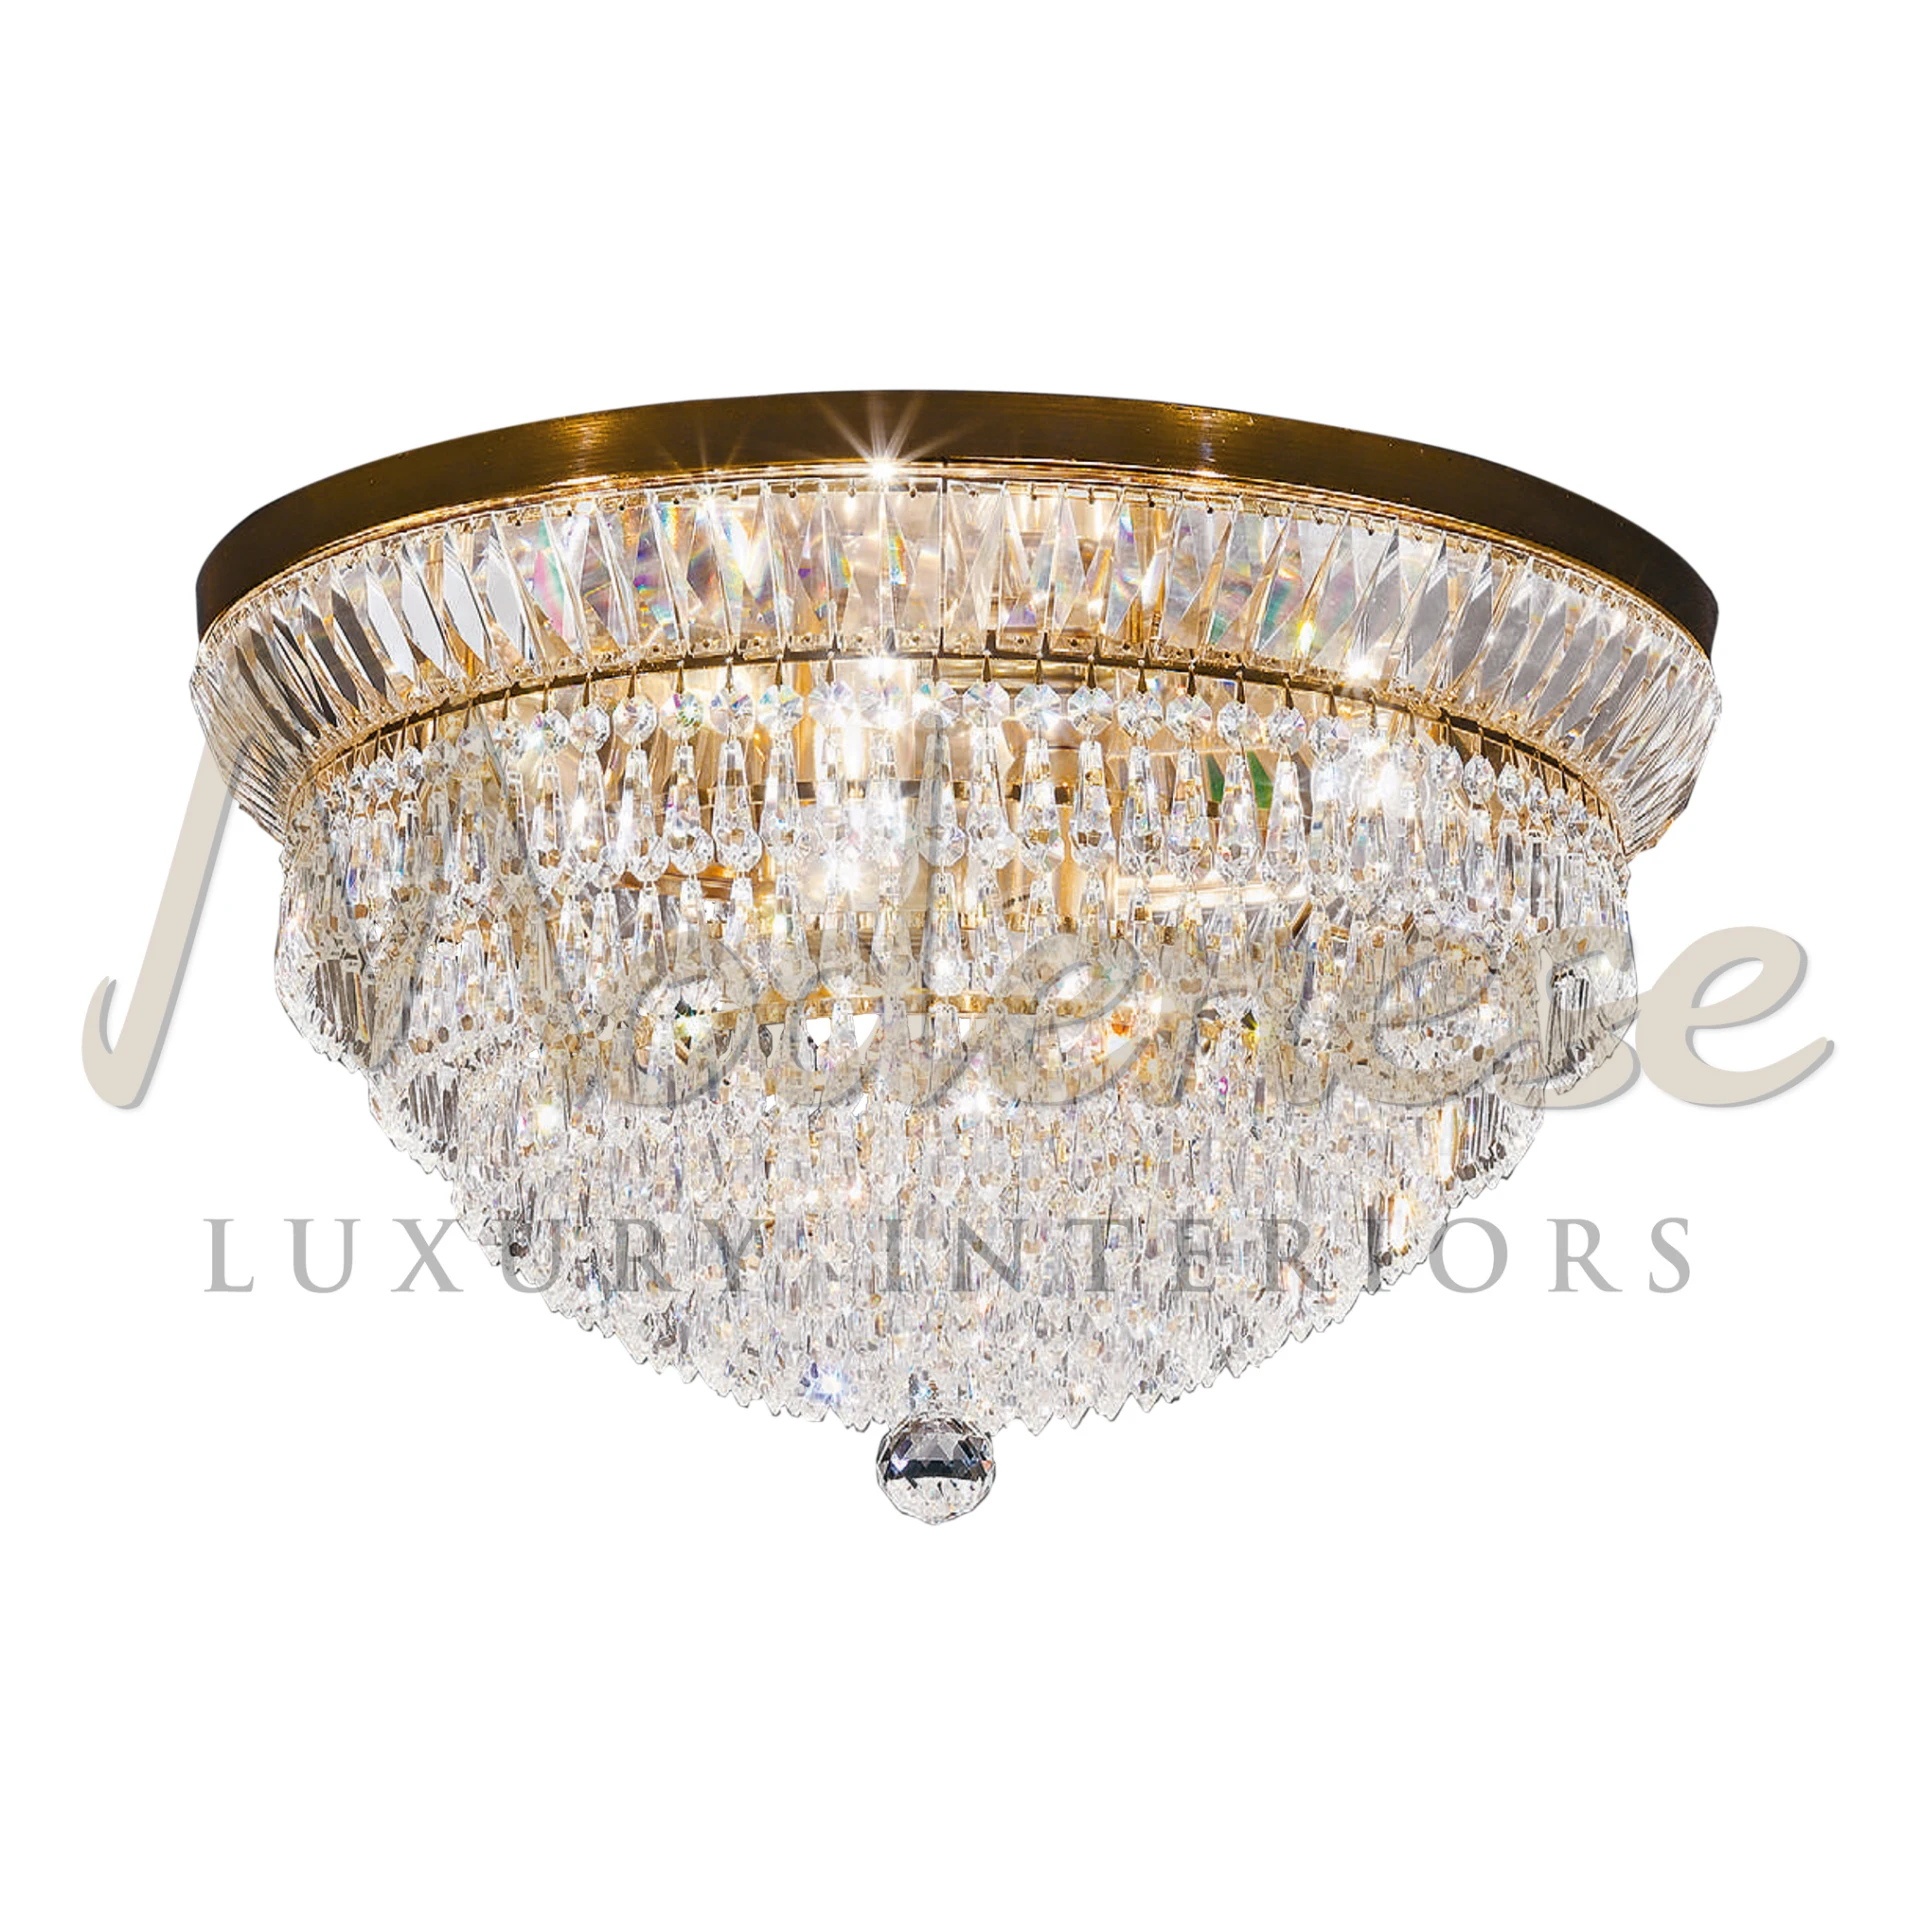 Shiny Ceiling Lamp with a gold rim and a multitude of shining crystals.